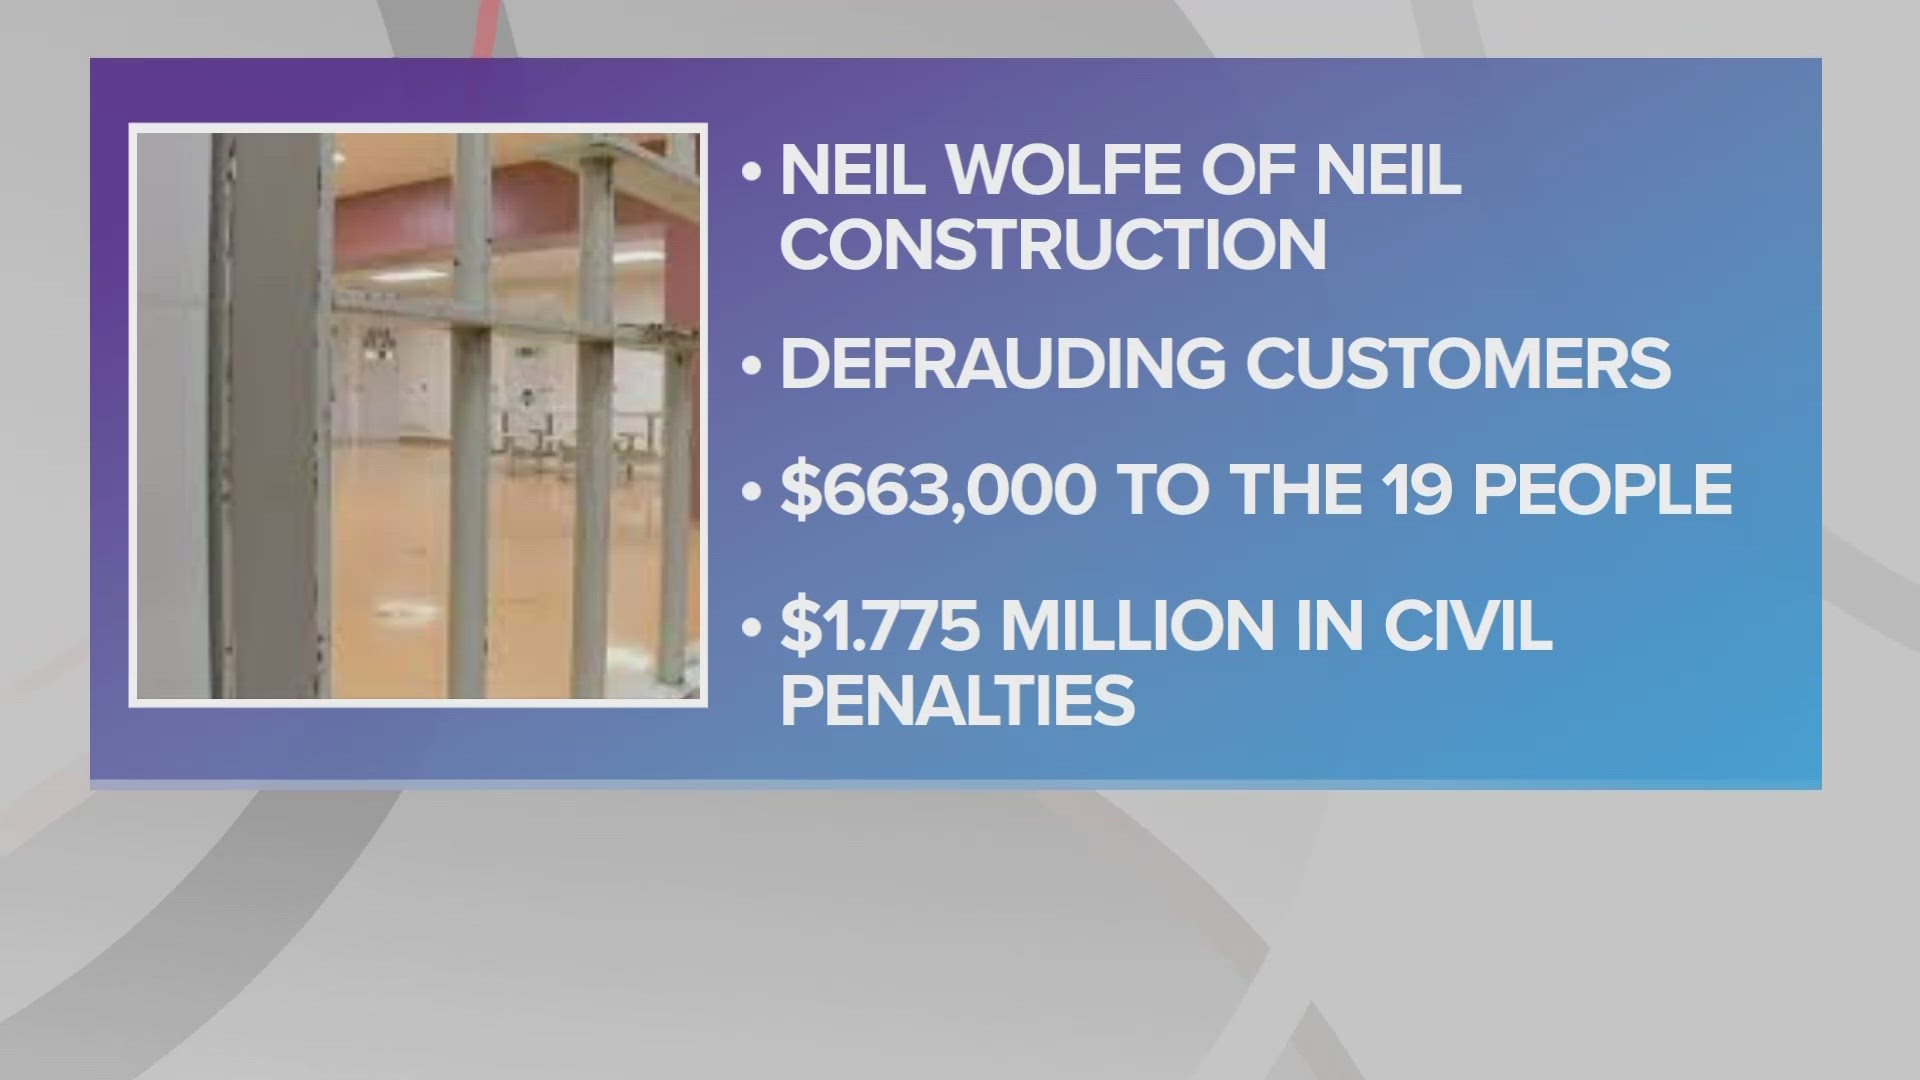 Ohio AG Dave Yost says Neil Wolfe would pocket customers' downpayments for home improvement jobs while he performed inadequate work, if any at all.